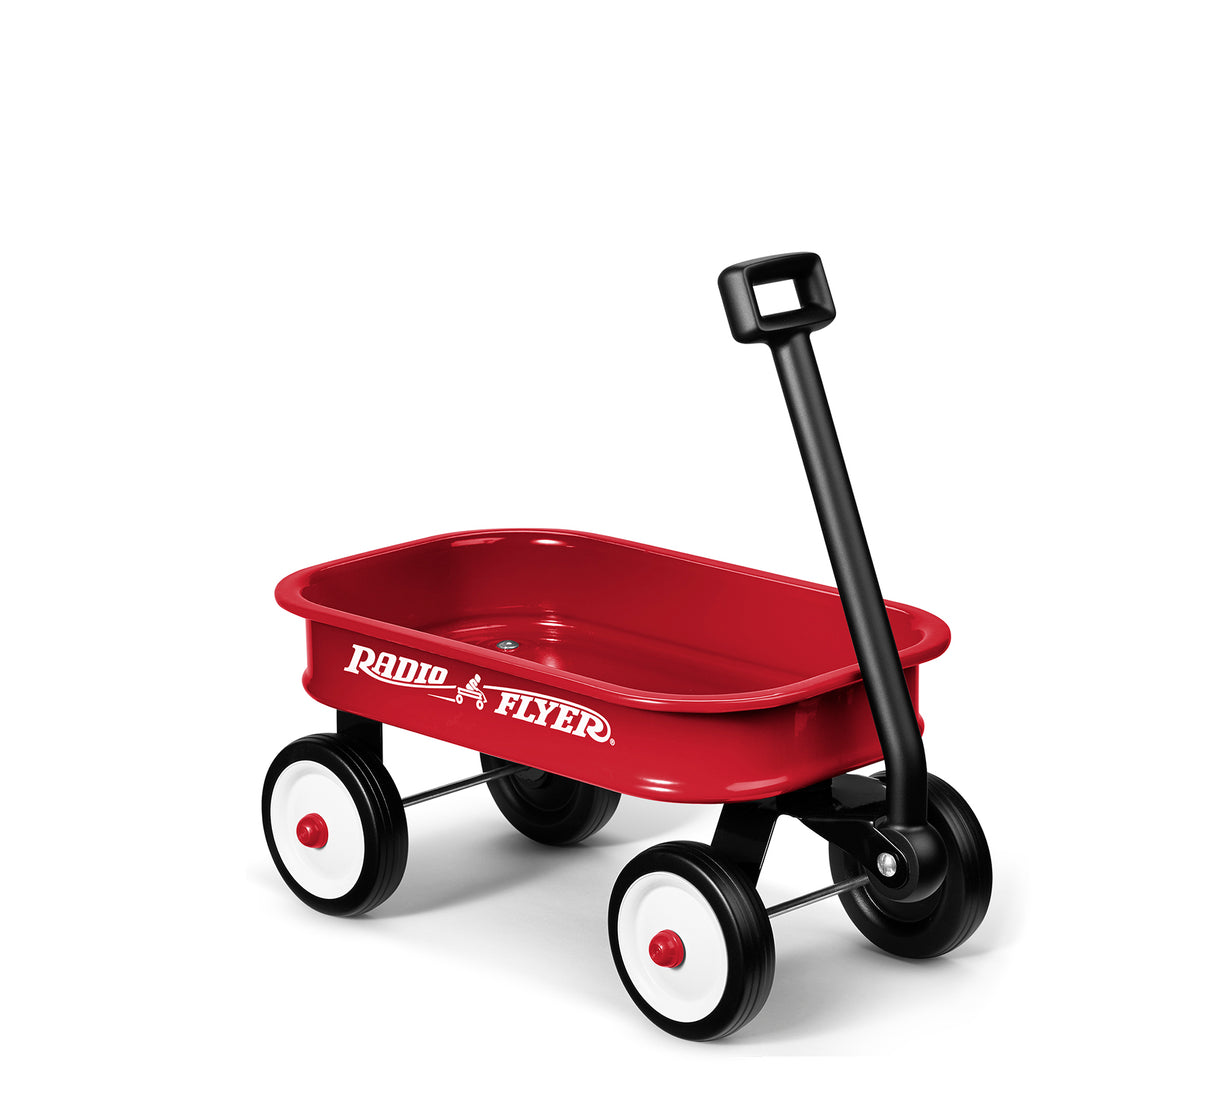 Little Red Toy Wagon